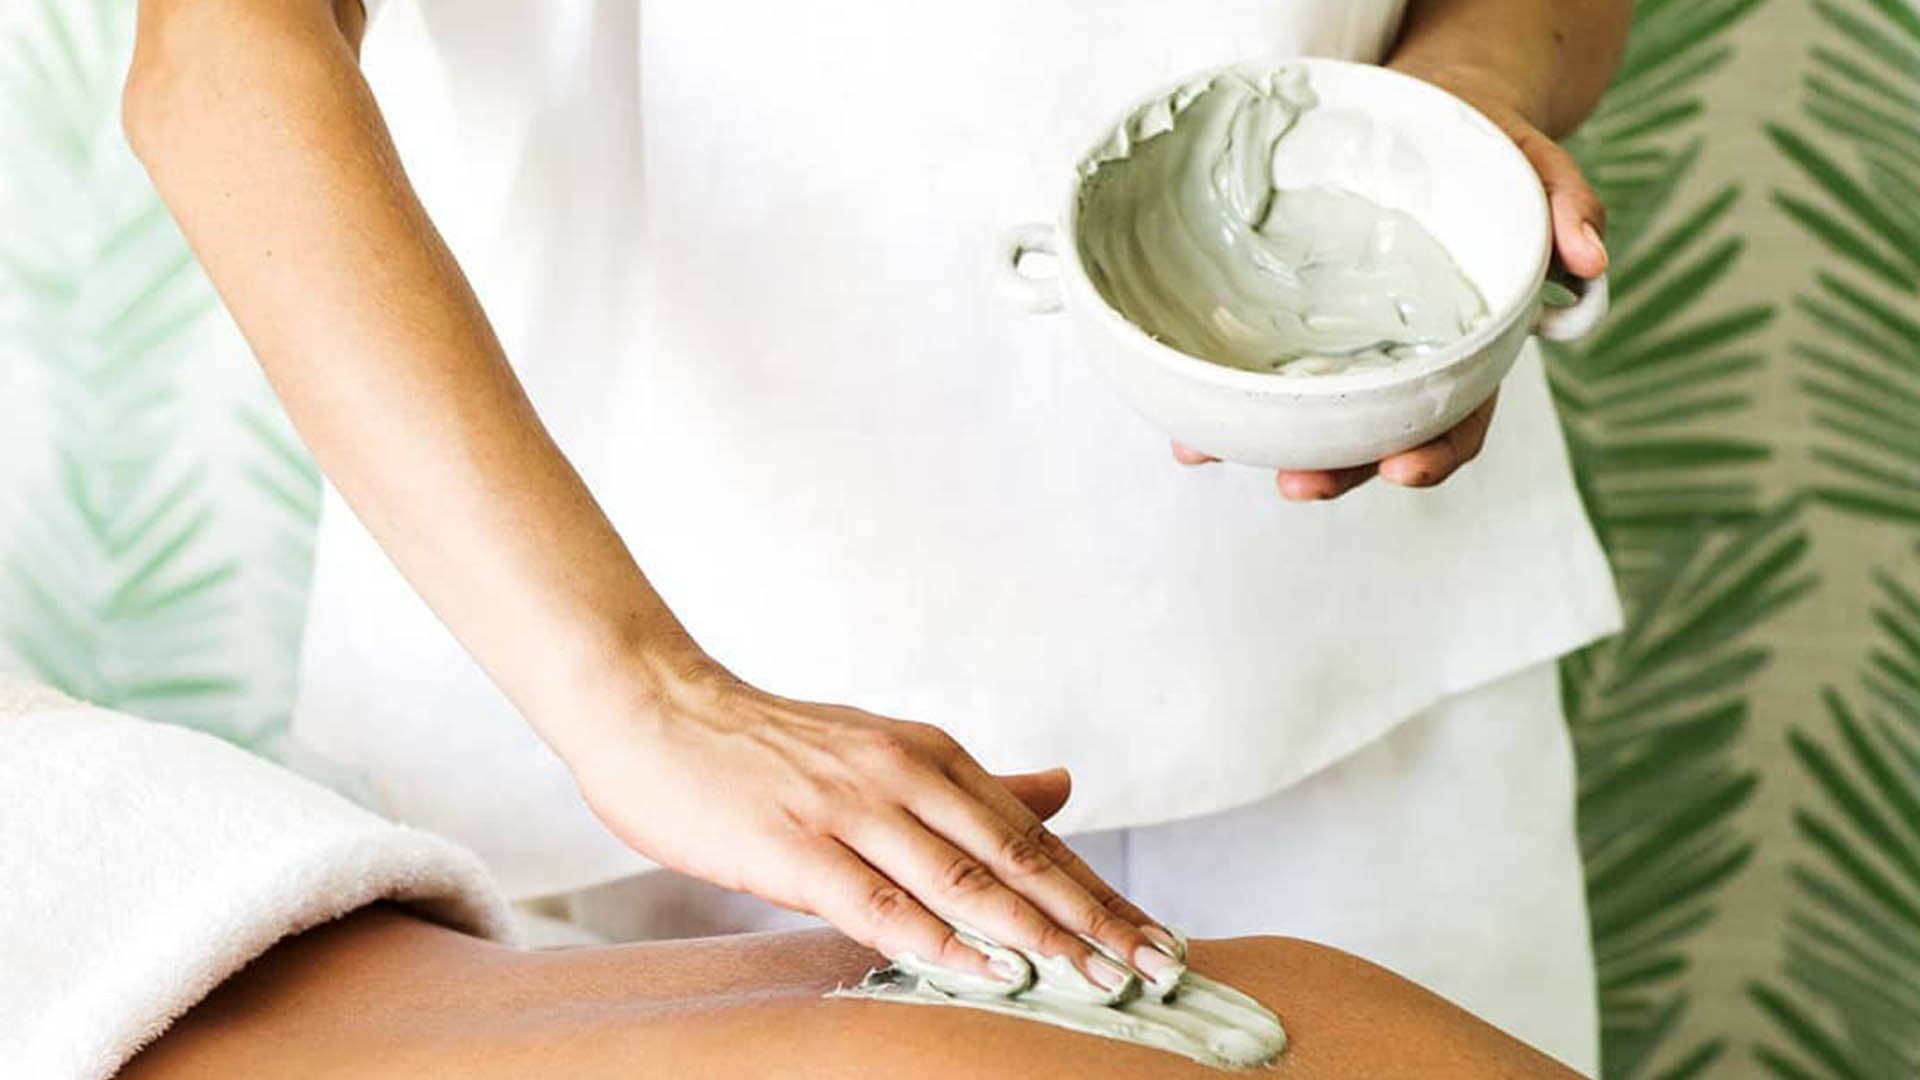 Earth-inspired wellness: the very best all-natural spa treatments